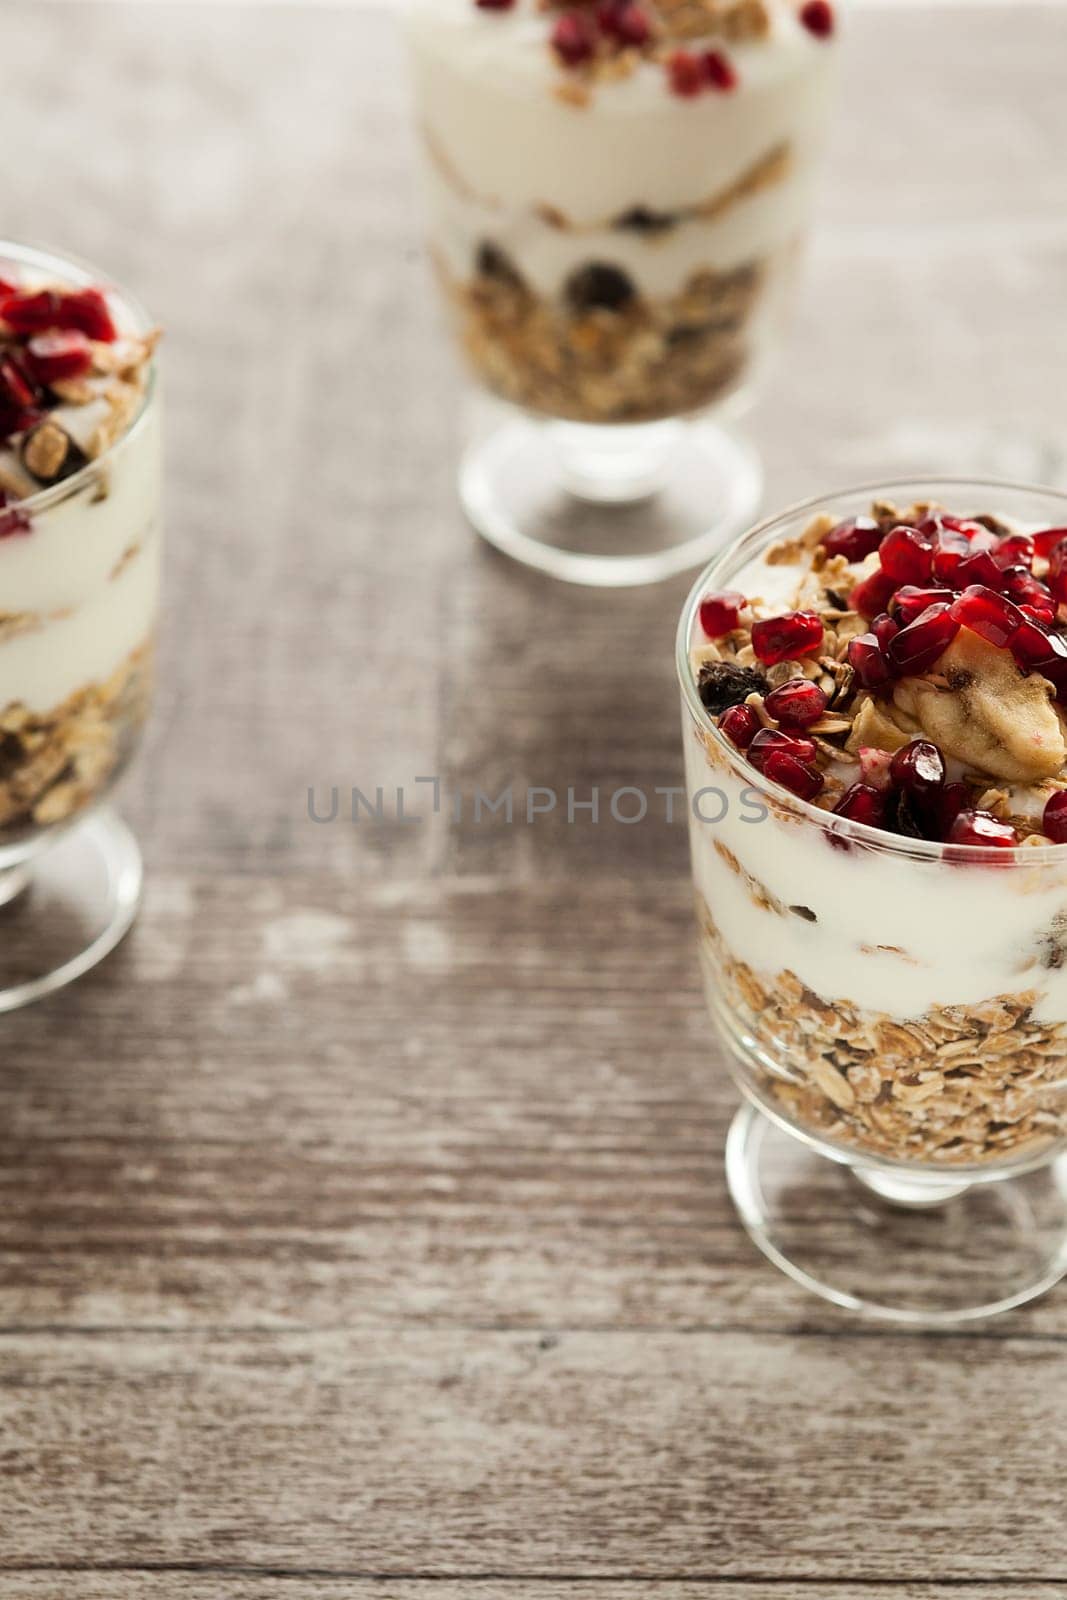 Home made muesli on wooden background. Food photography